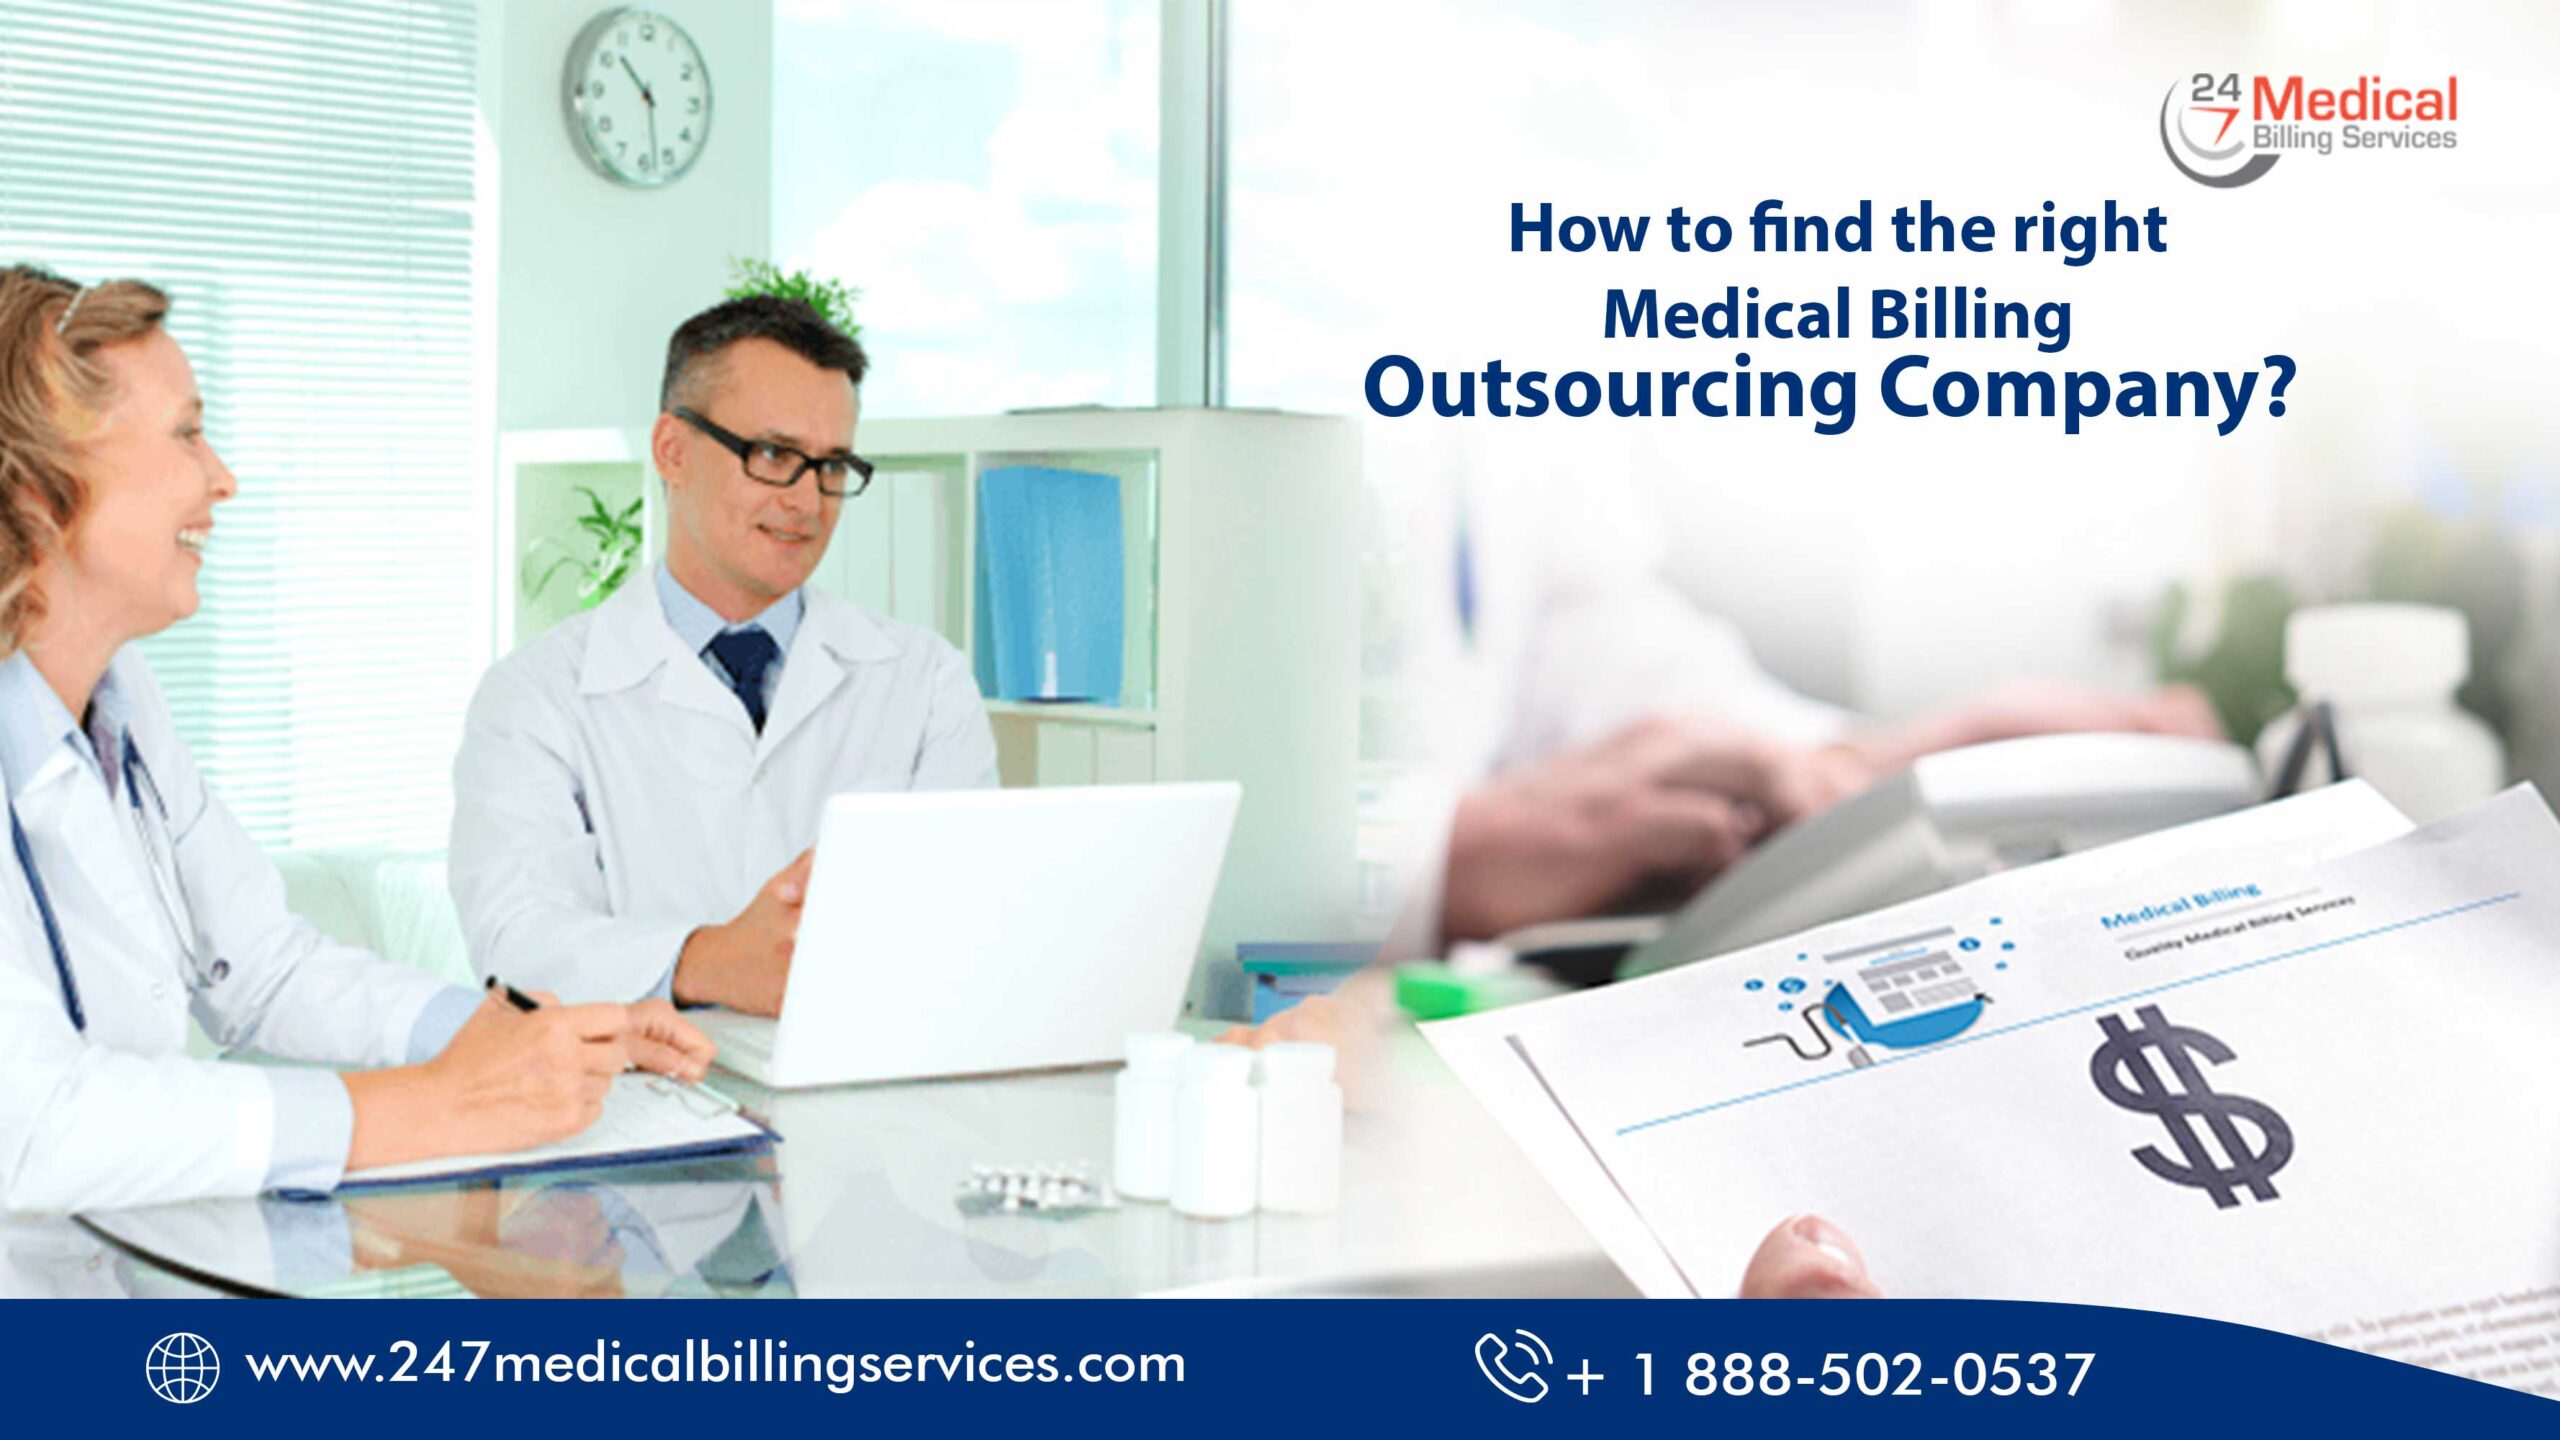  How to Find the Right Medical Billing Outsourcing Company?